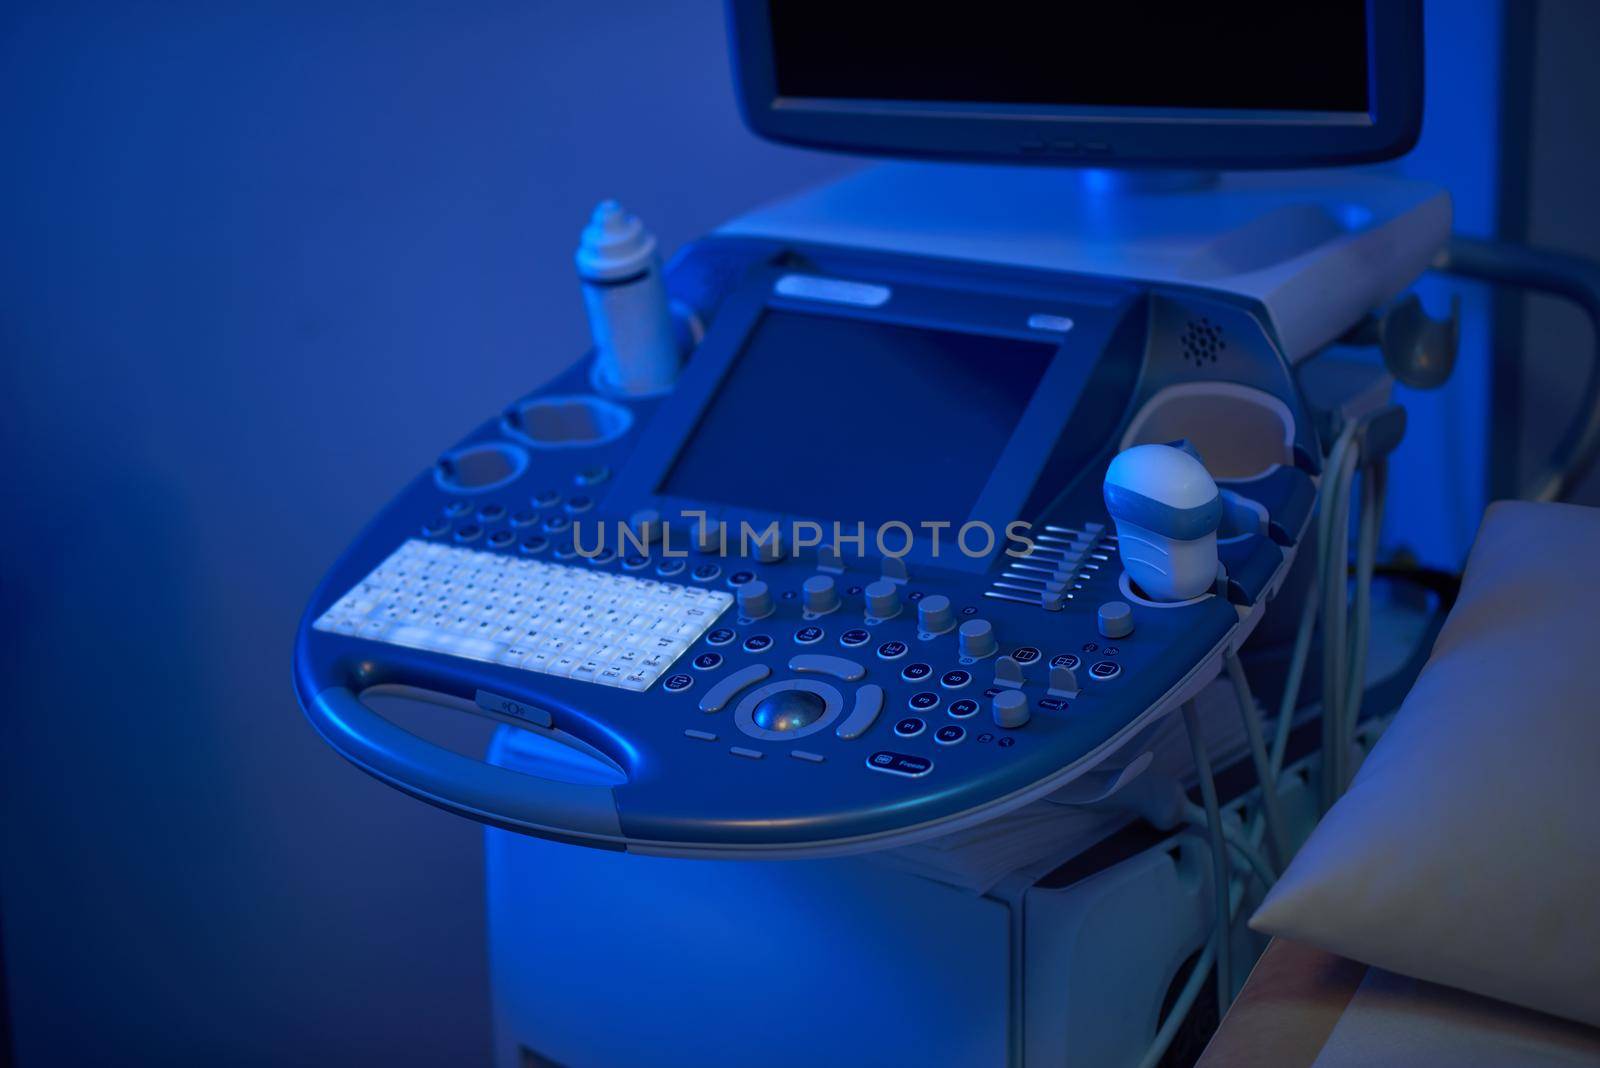 Modern medical equipment at the clinic ultrasound x-ray scanner ultraviolet lighting sterile medicine medical industry health healthcare technology concept.